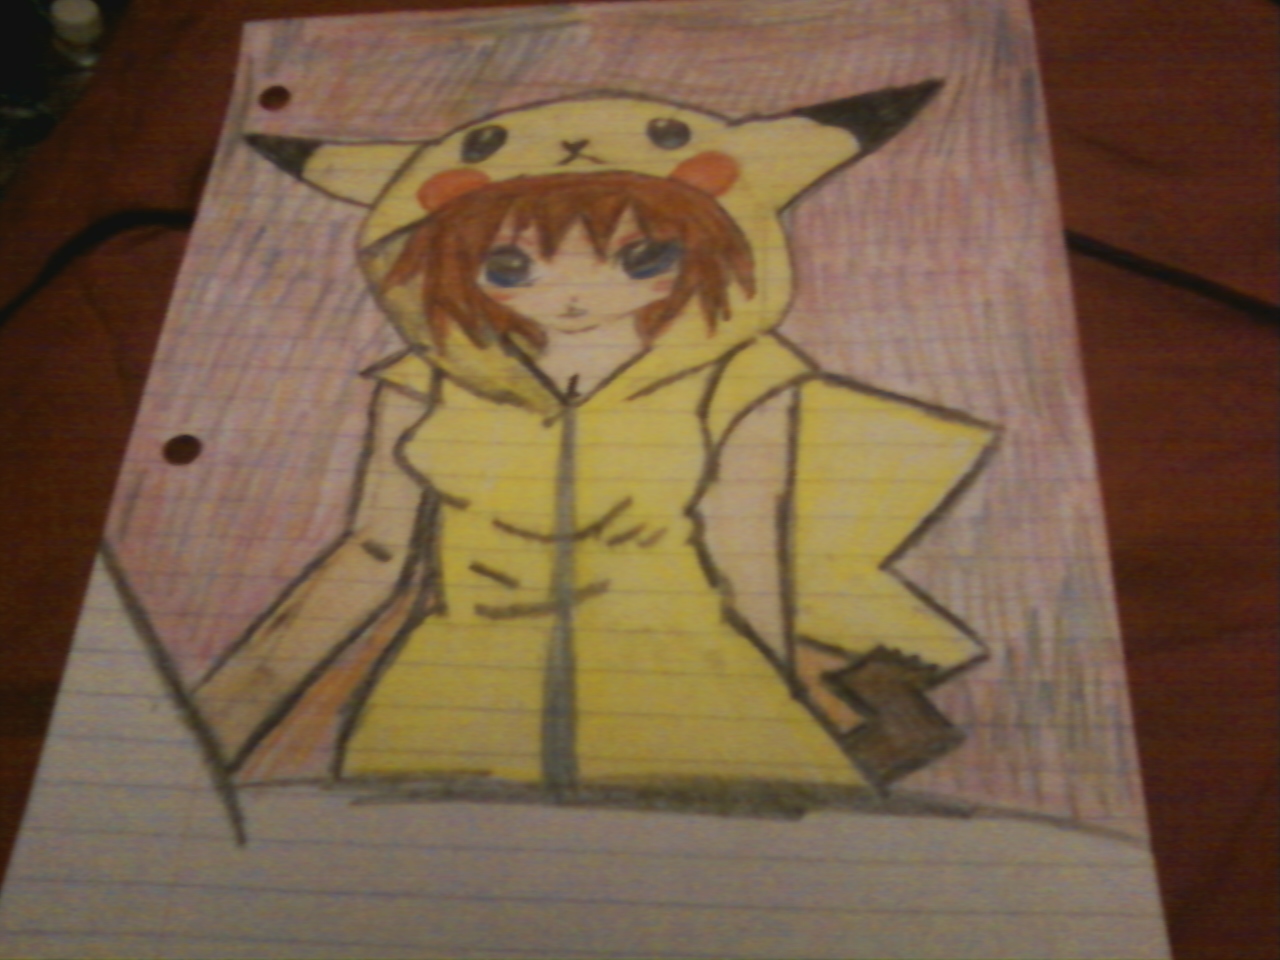 pikachu as a girl in human form by iloveyouforeveridiot